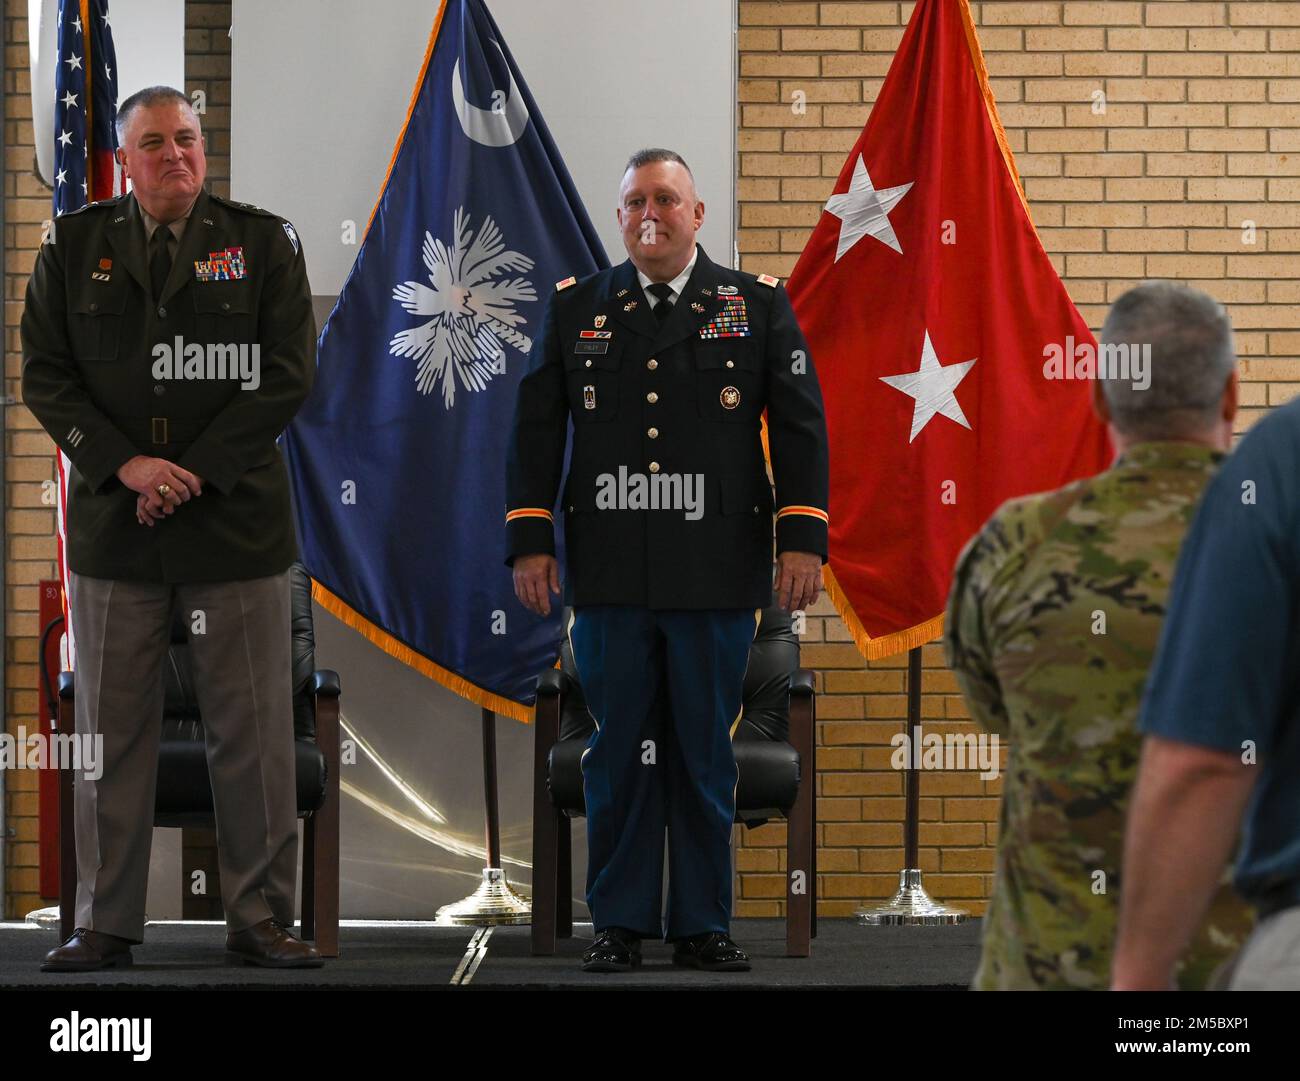 U.S. Army Col. James Finley, United States Personnel and Finance Officer, South Carolina National Guard, is recognized for his service during a retirement ceremony, Feb. 25, 2022, at the Bluff Road Armory, Columbia, South Carolina. Finley is retiring after 41 years of service. Stock Photo